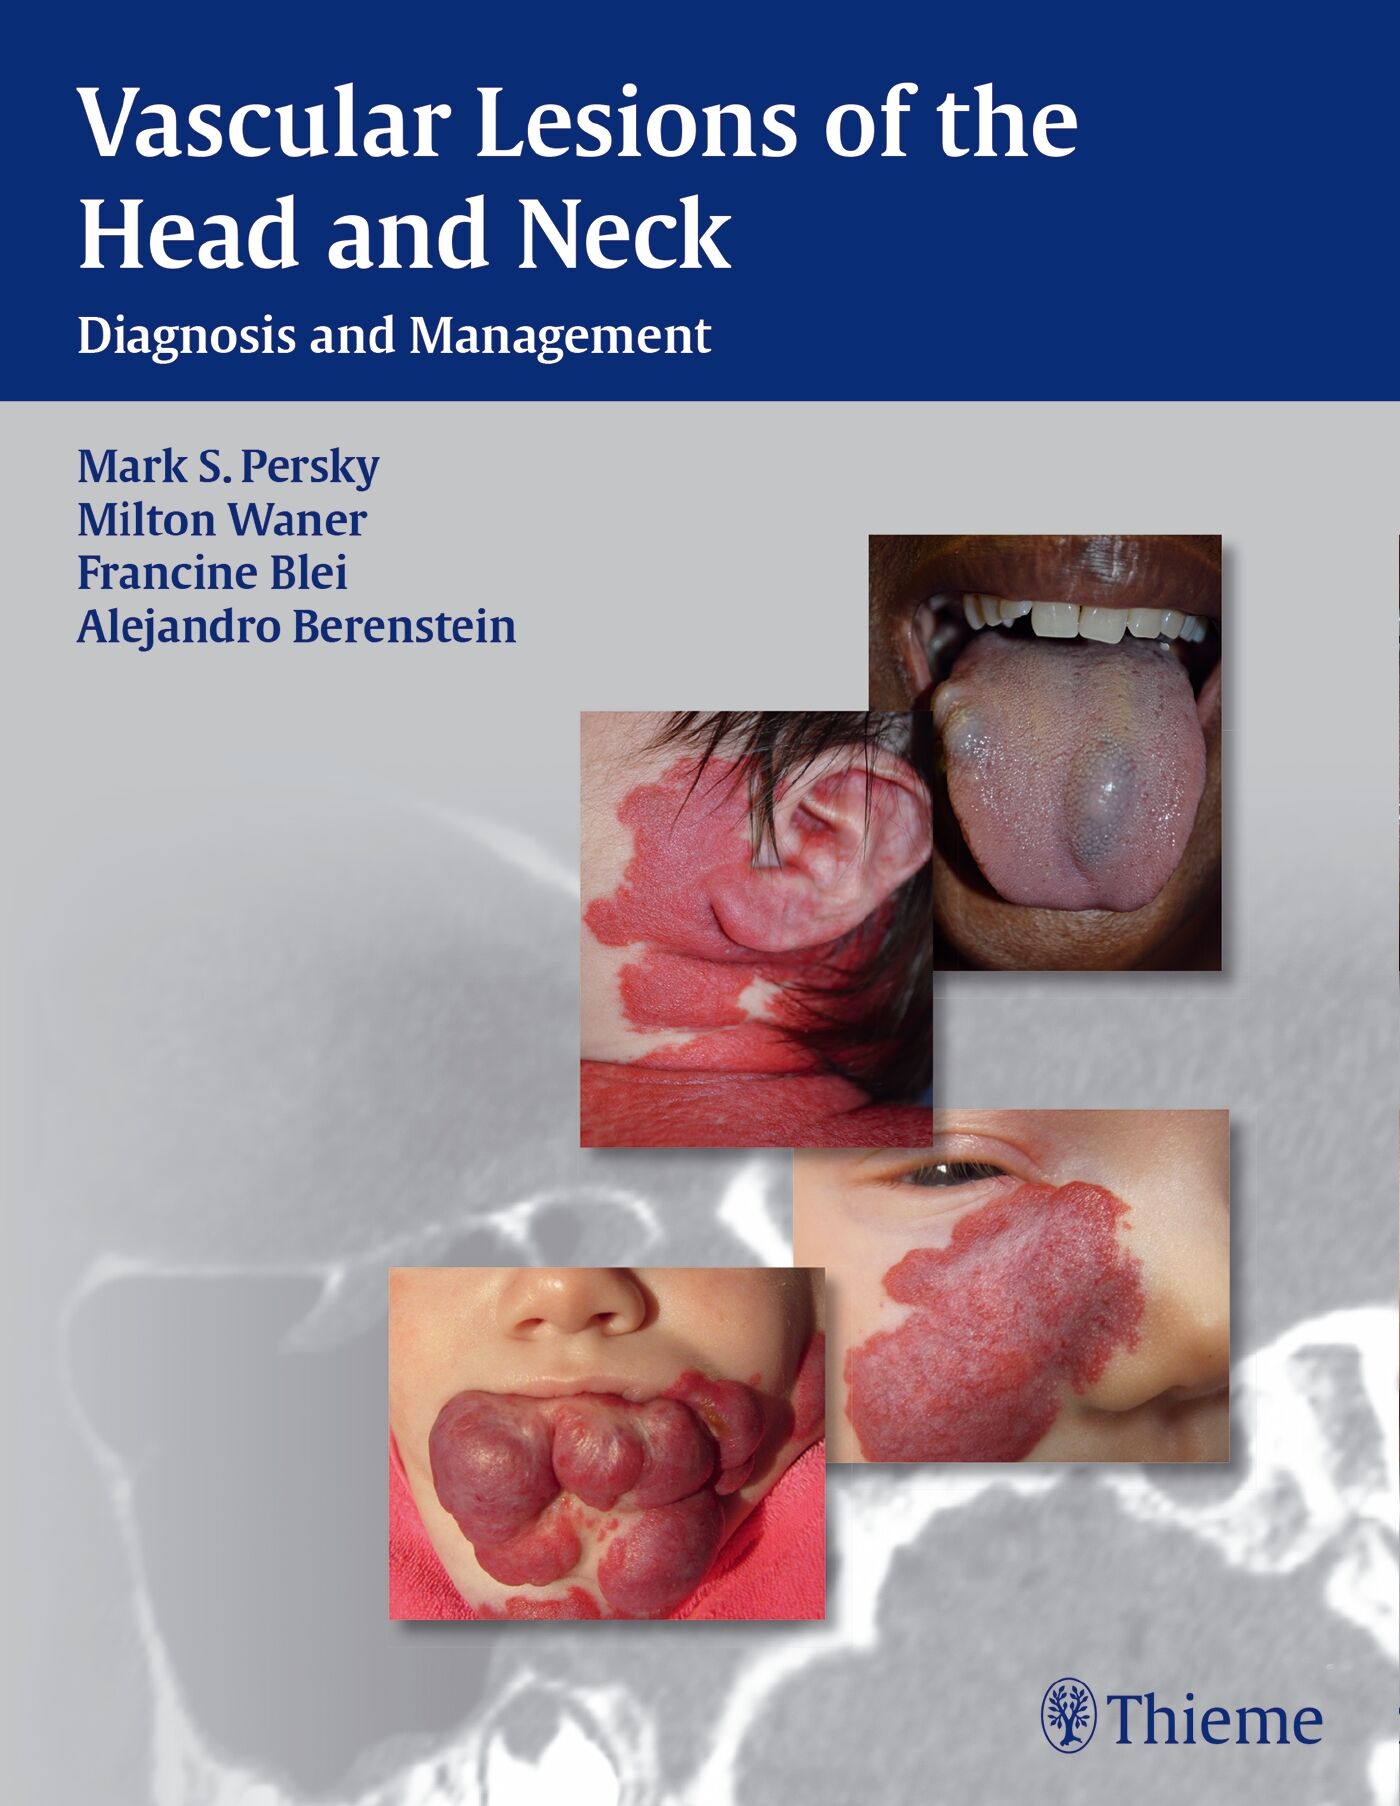 Vascular Lesions of the Head and Neck, 9781604060591